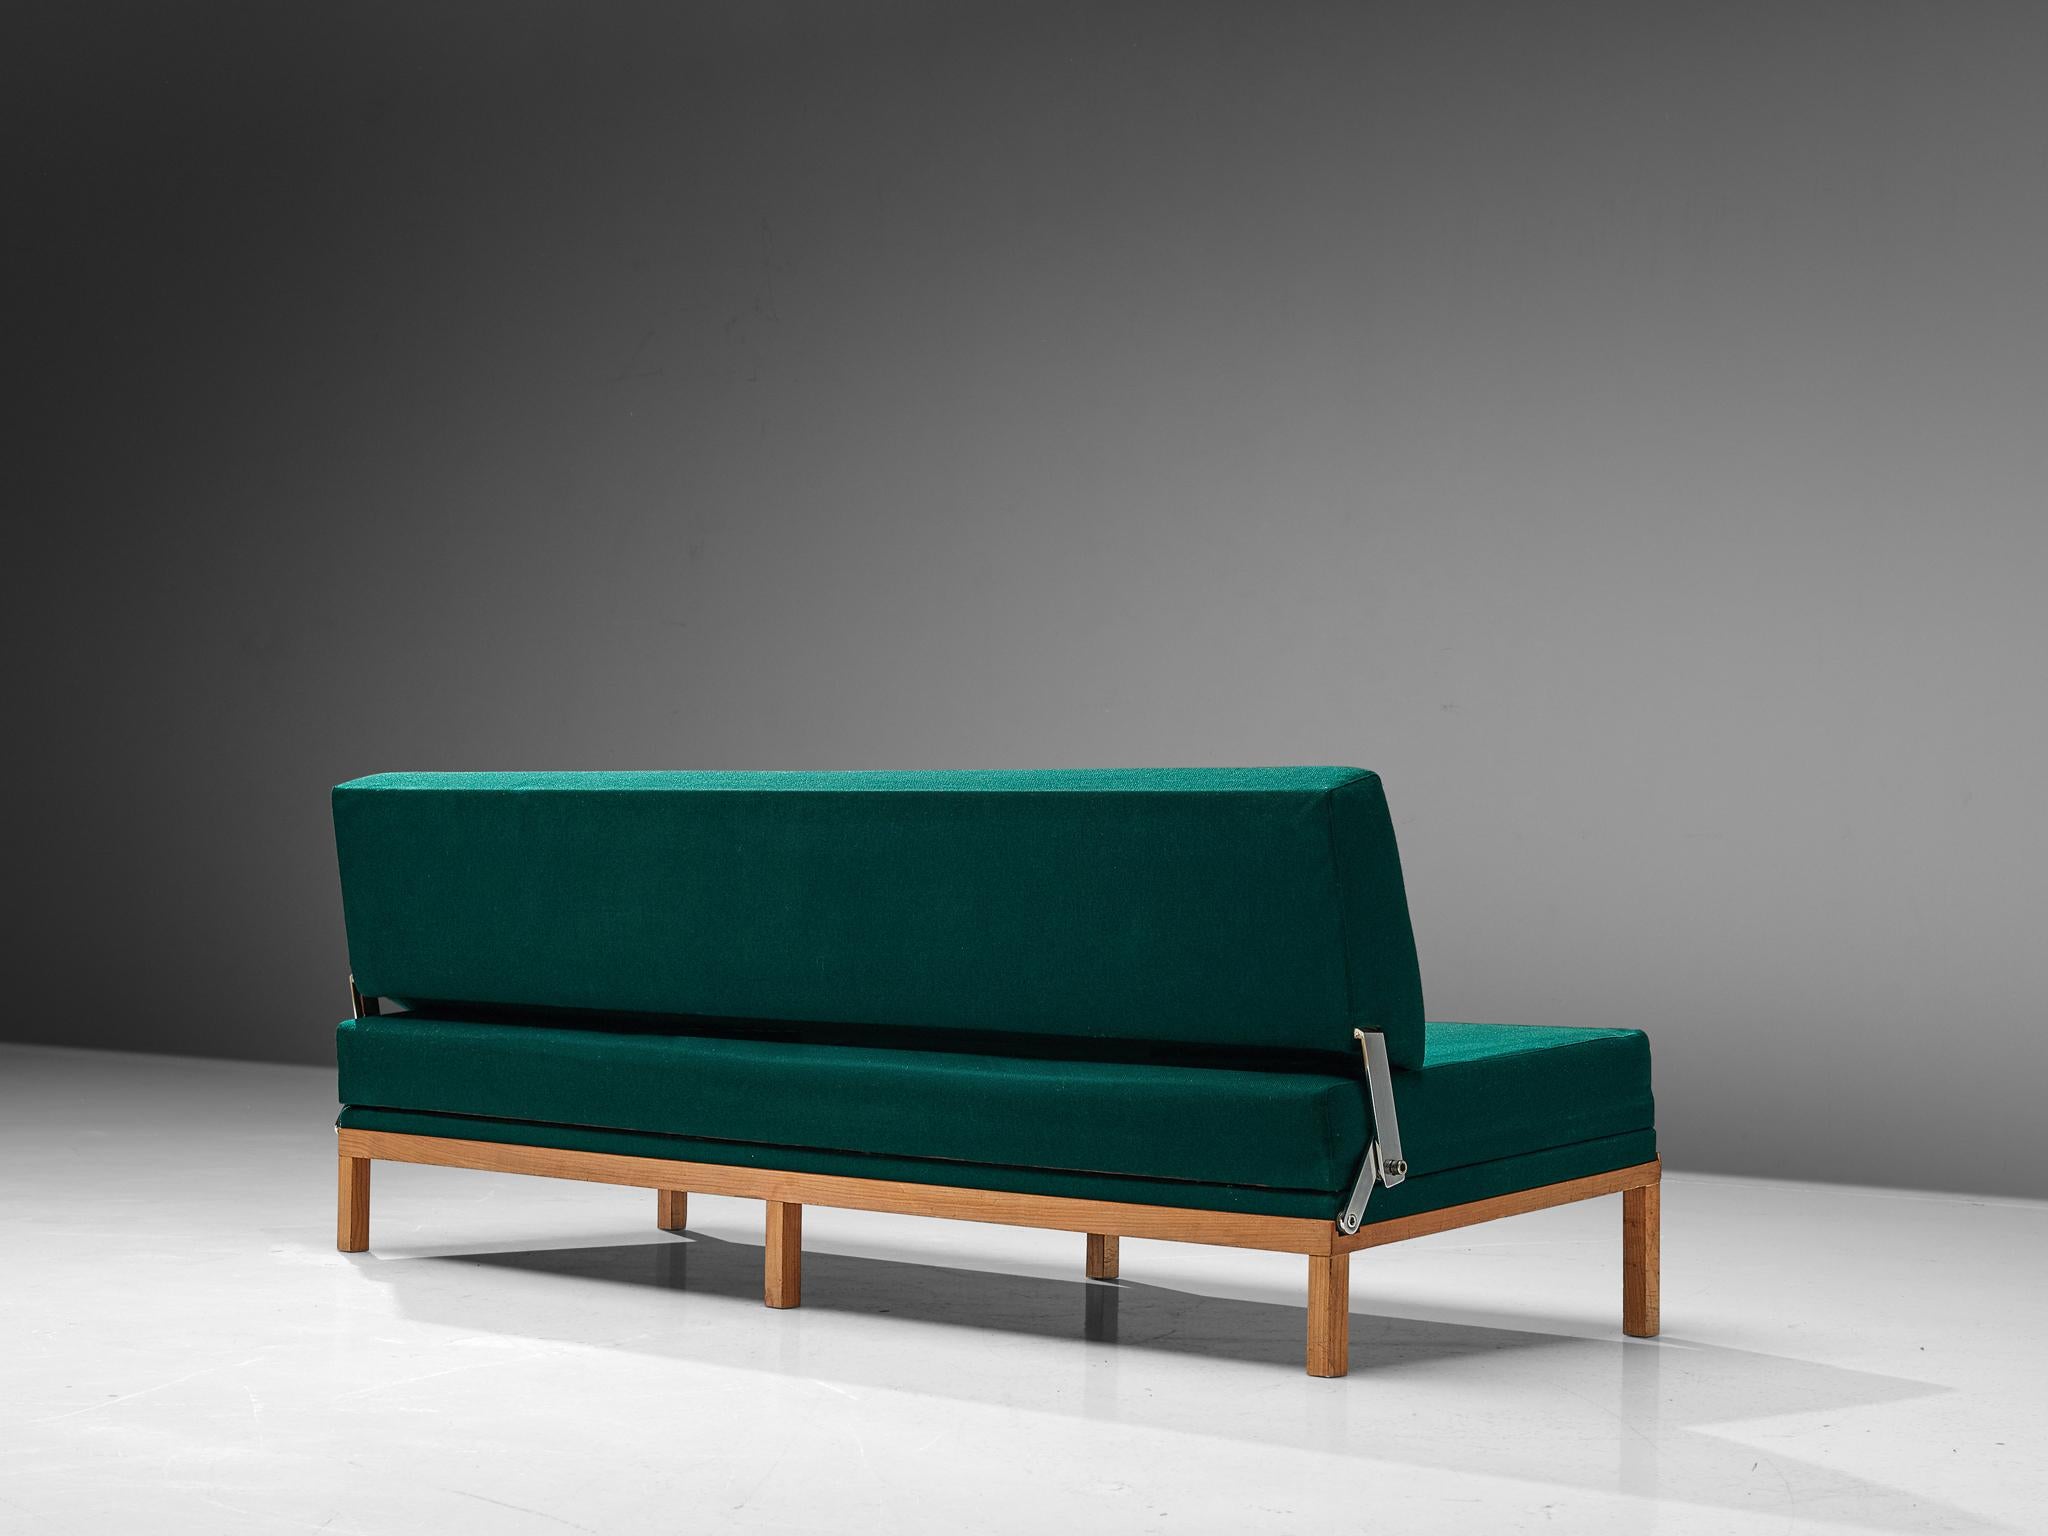 Johannes Spalt 'Constanze' Daybed in Green Upholstery 1